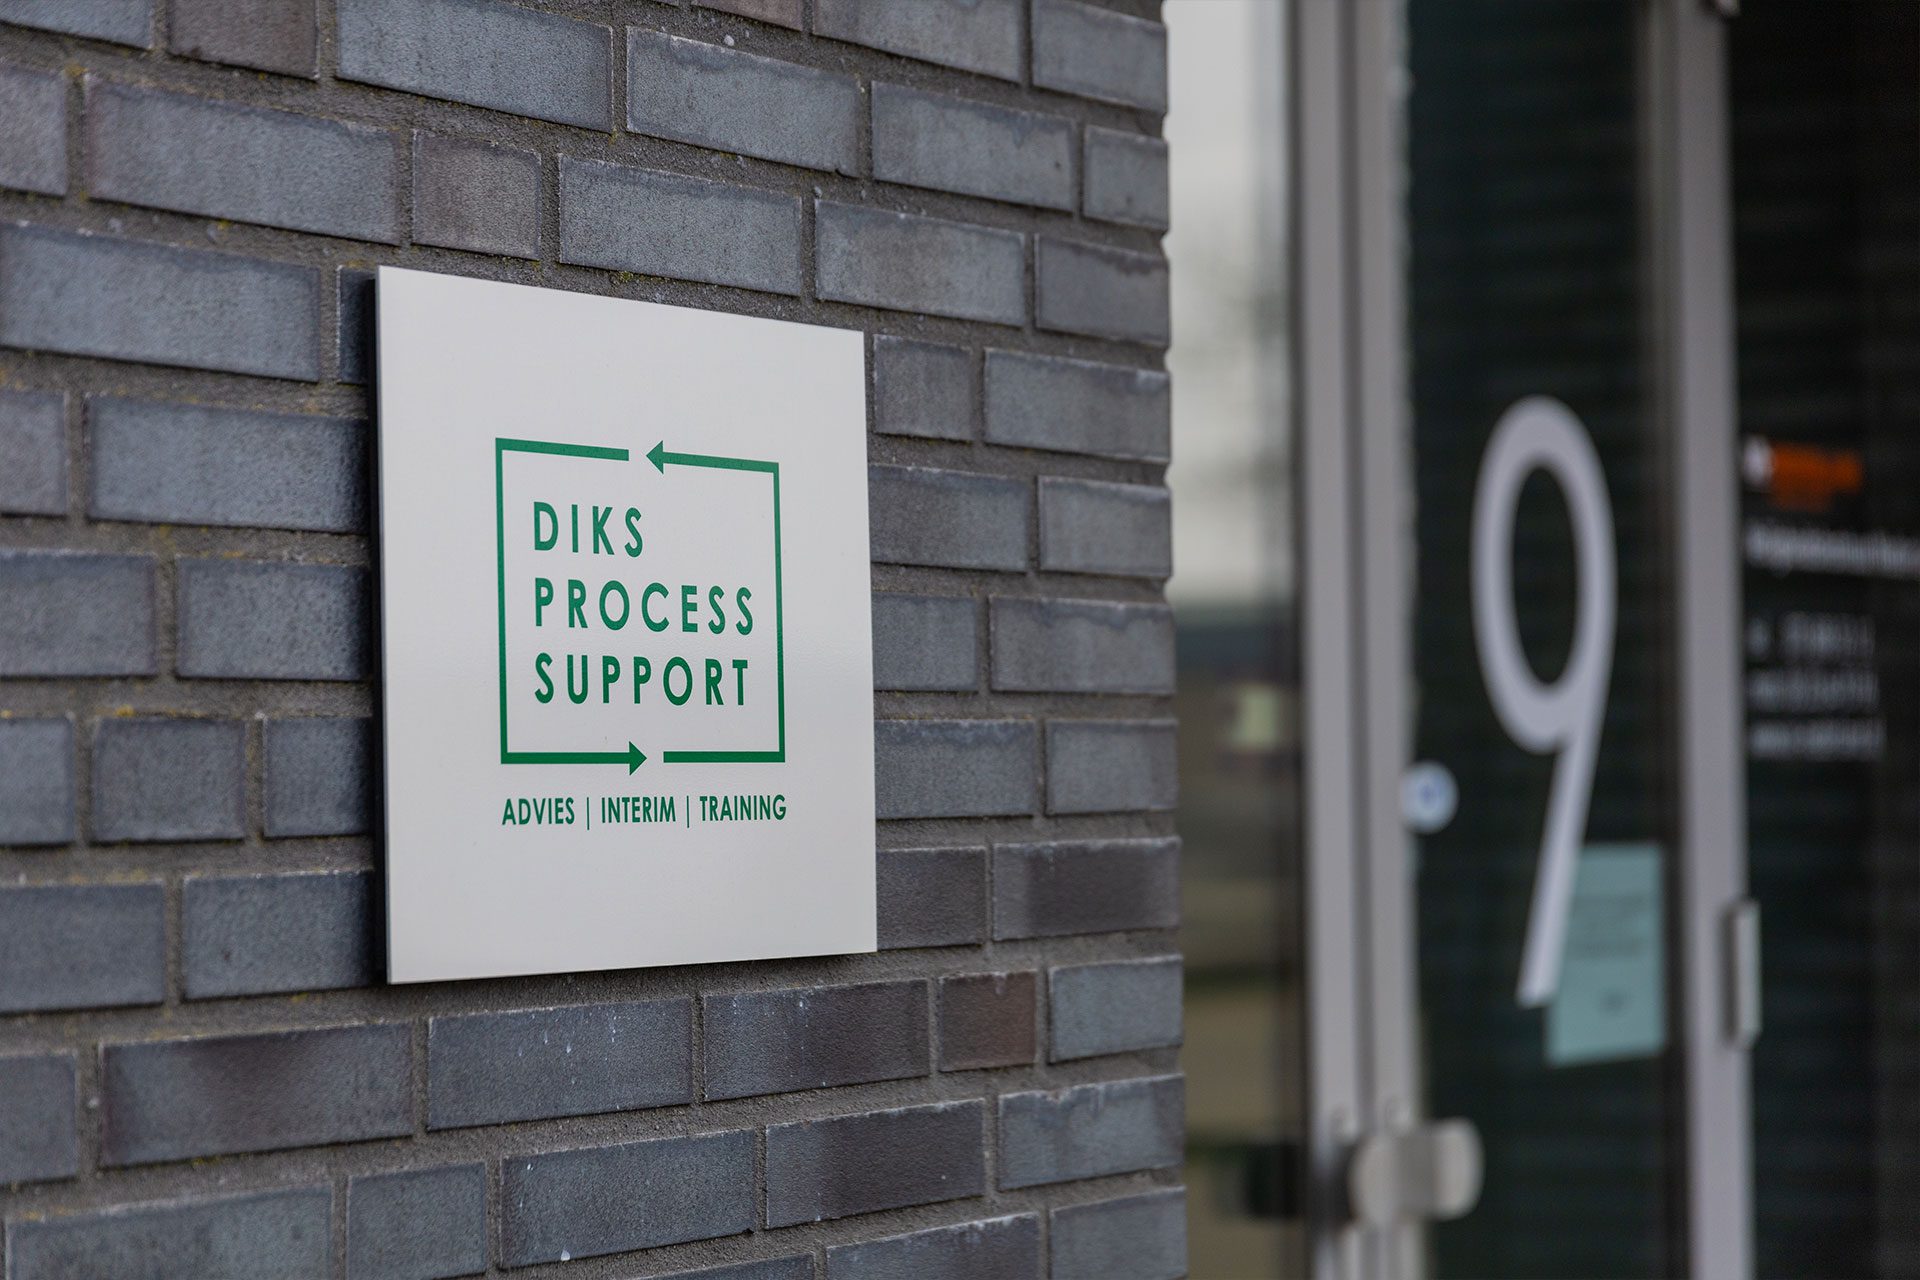 Diks Process Support